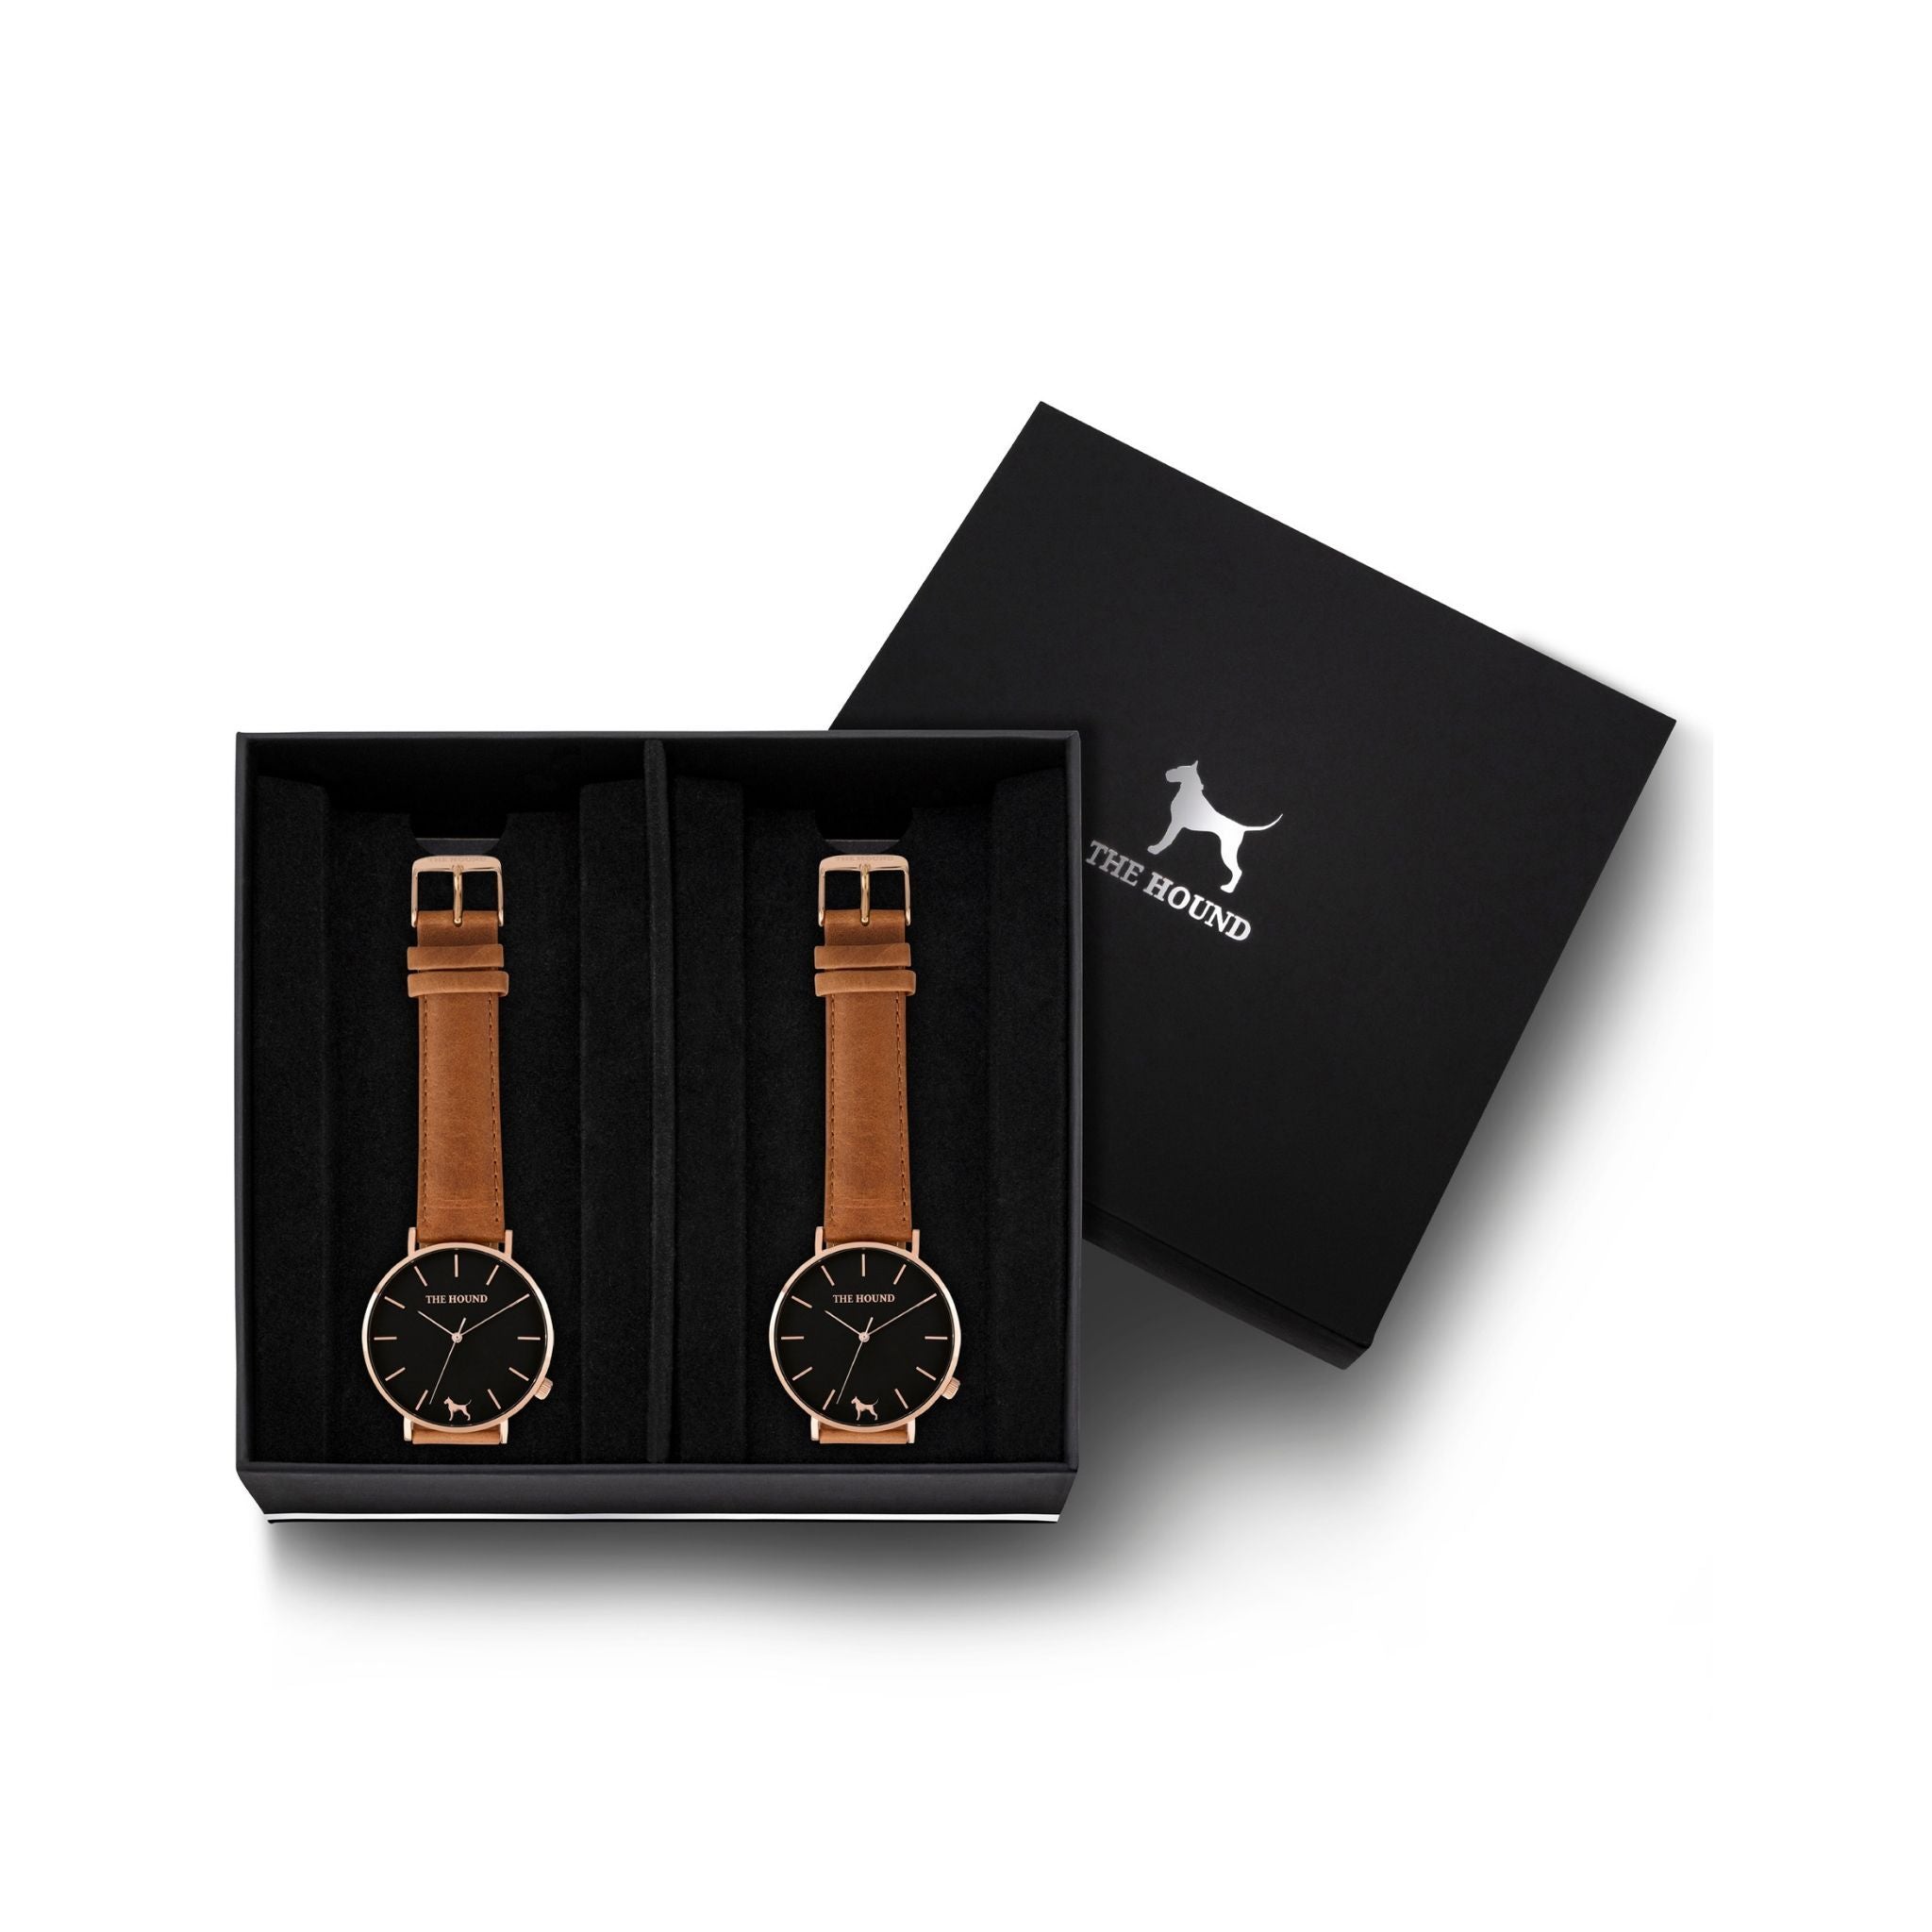 Custom gift set - Rose gold and black watch with stitched tan genuine leather band and a rose gold and black watch with stitched tan genuine leather band